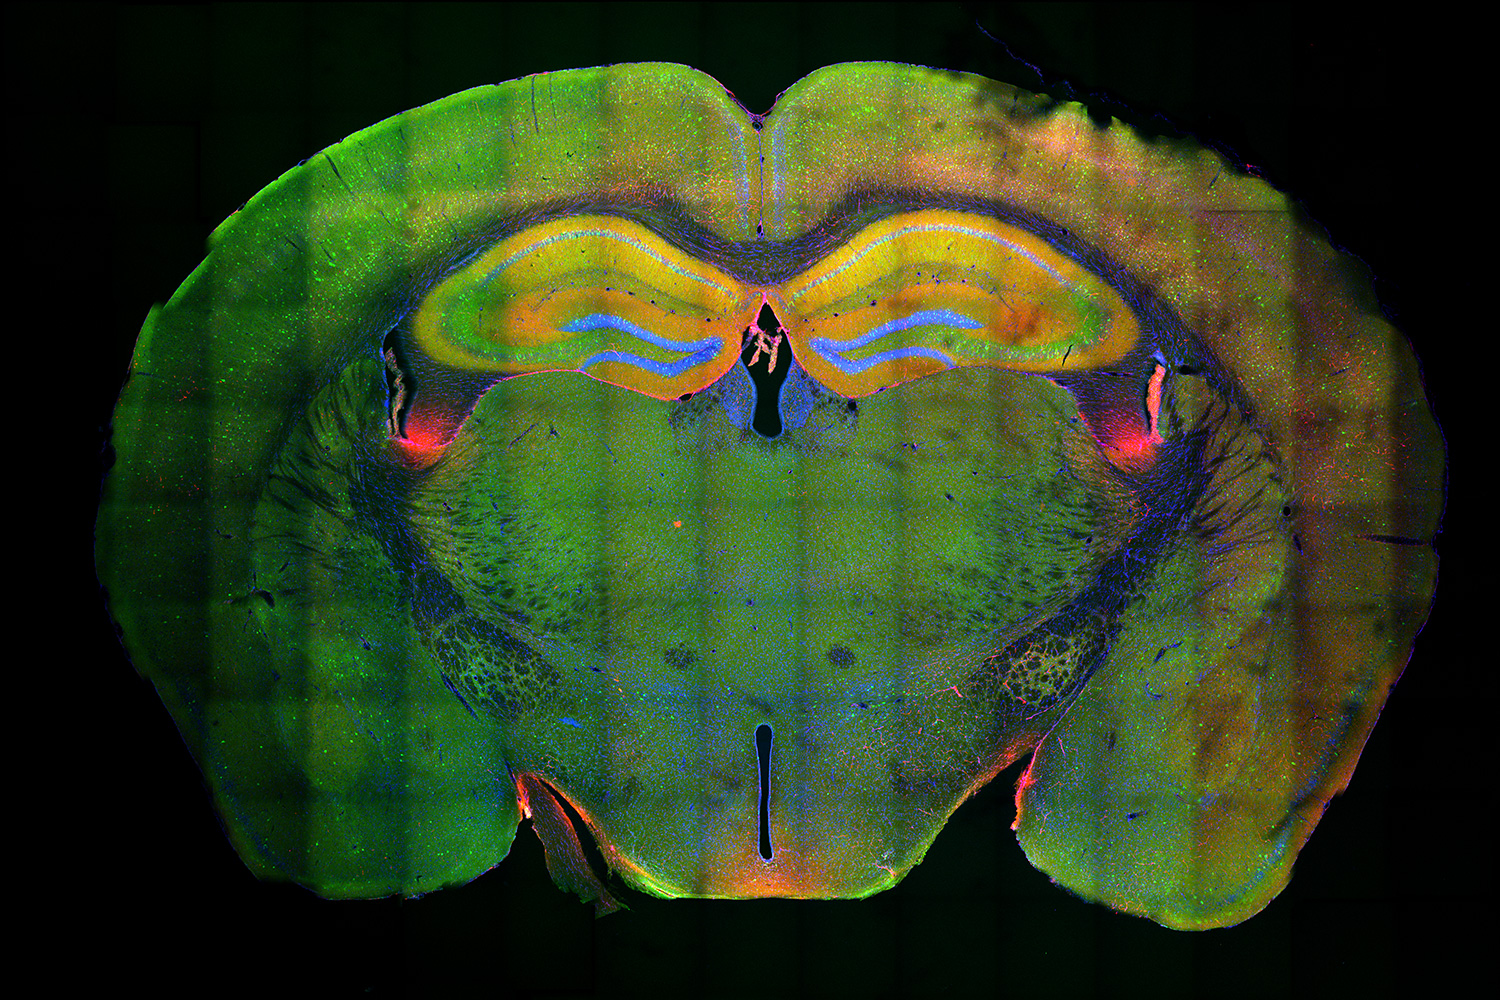 A colorful cross section of a mouse brain